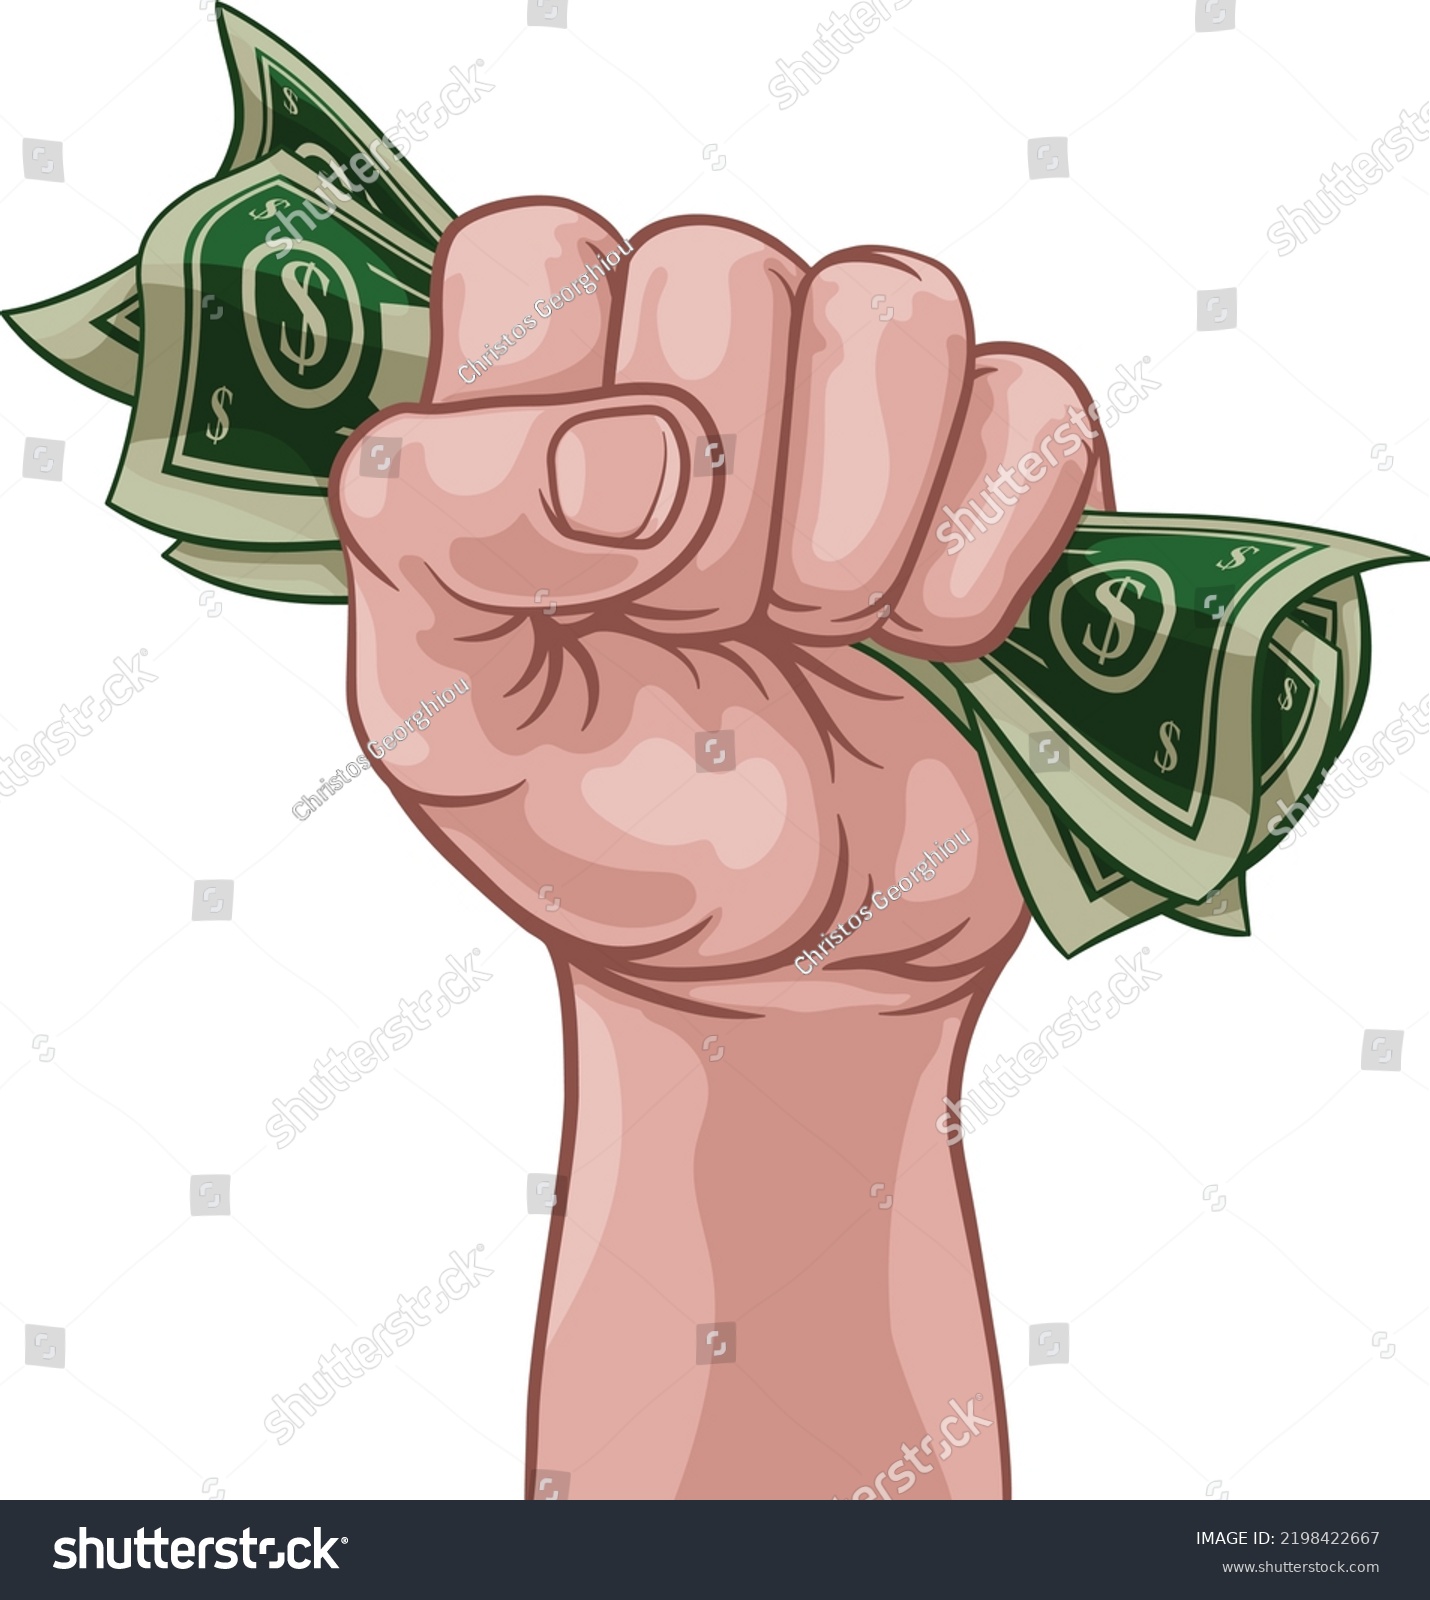 SVG of A hand in a fist squeezing cash money dollar bills. In a comic book pop art cartoon illustration style svg